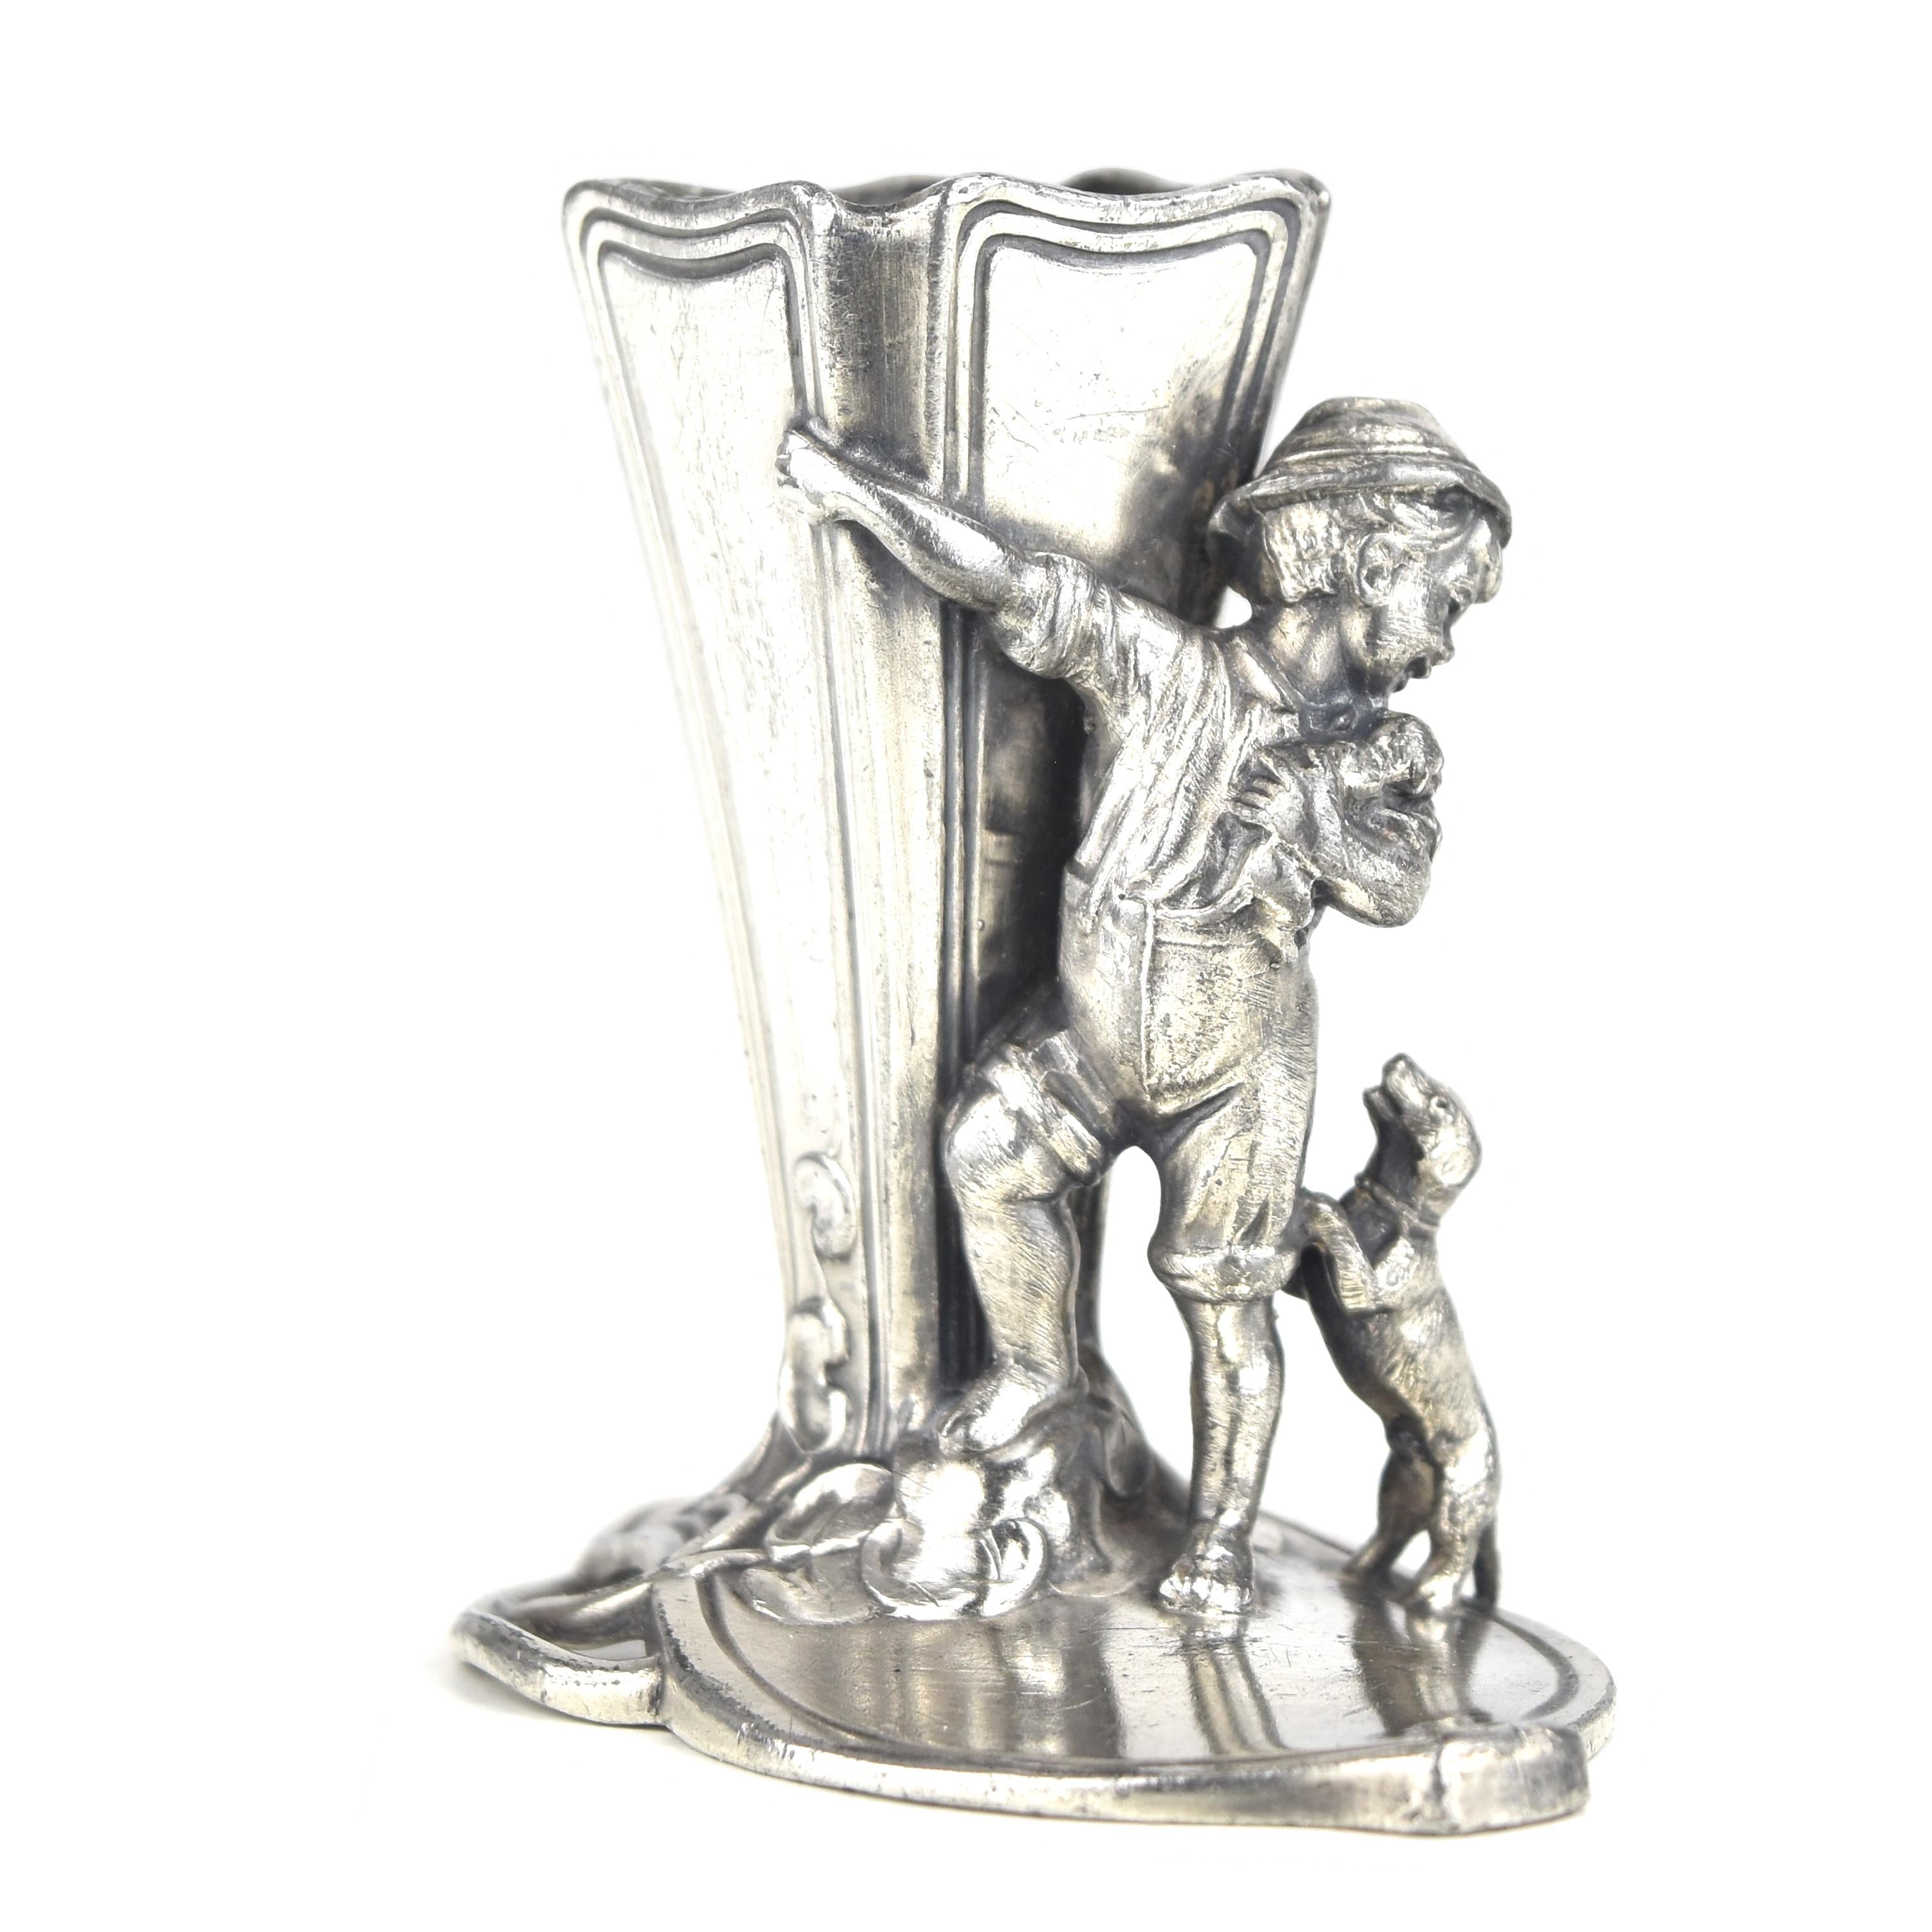 This cute antique Art Nouveau figurative toothpick holder by WMF is a delightful representation of the period's artistic sensibilities. Crafted from silver-plated pewter in a material known as 